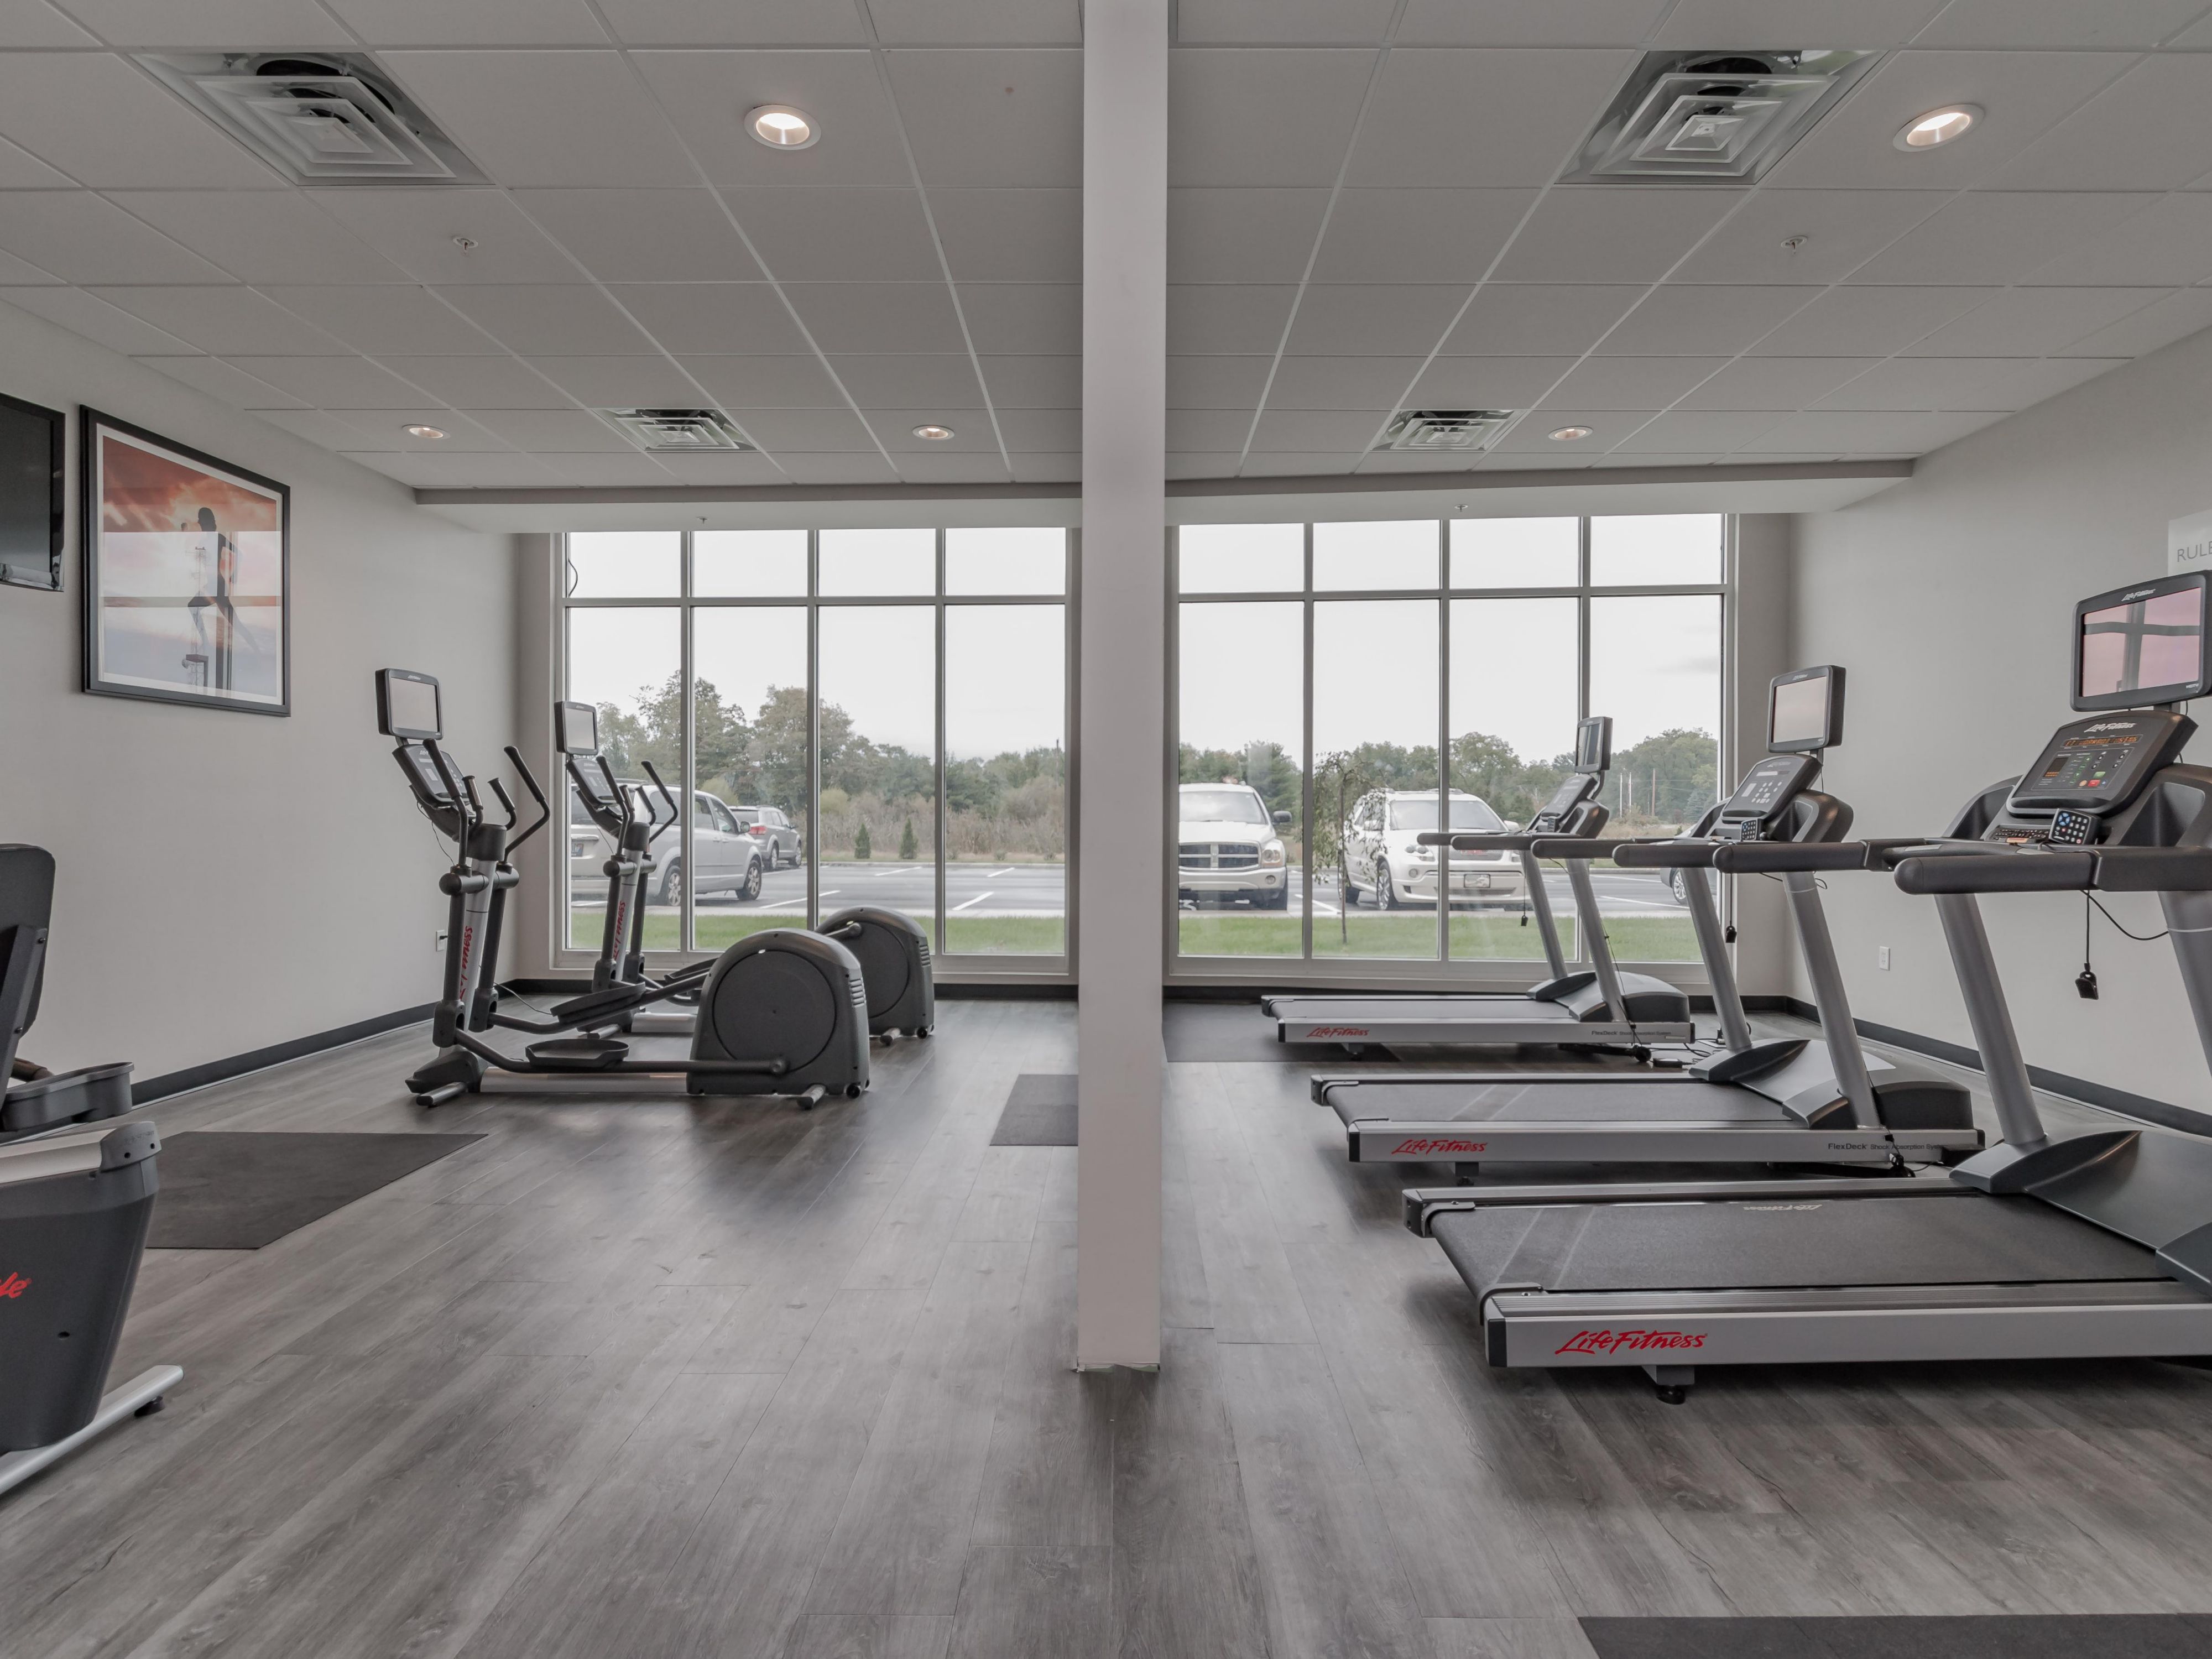 Every guest can enjoy our complimentary 24-hour fitness center while staying with us! Our fitness center features 2 treadmills, 1 exercise bike, 1 elliptical machine, and free weights.